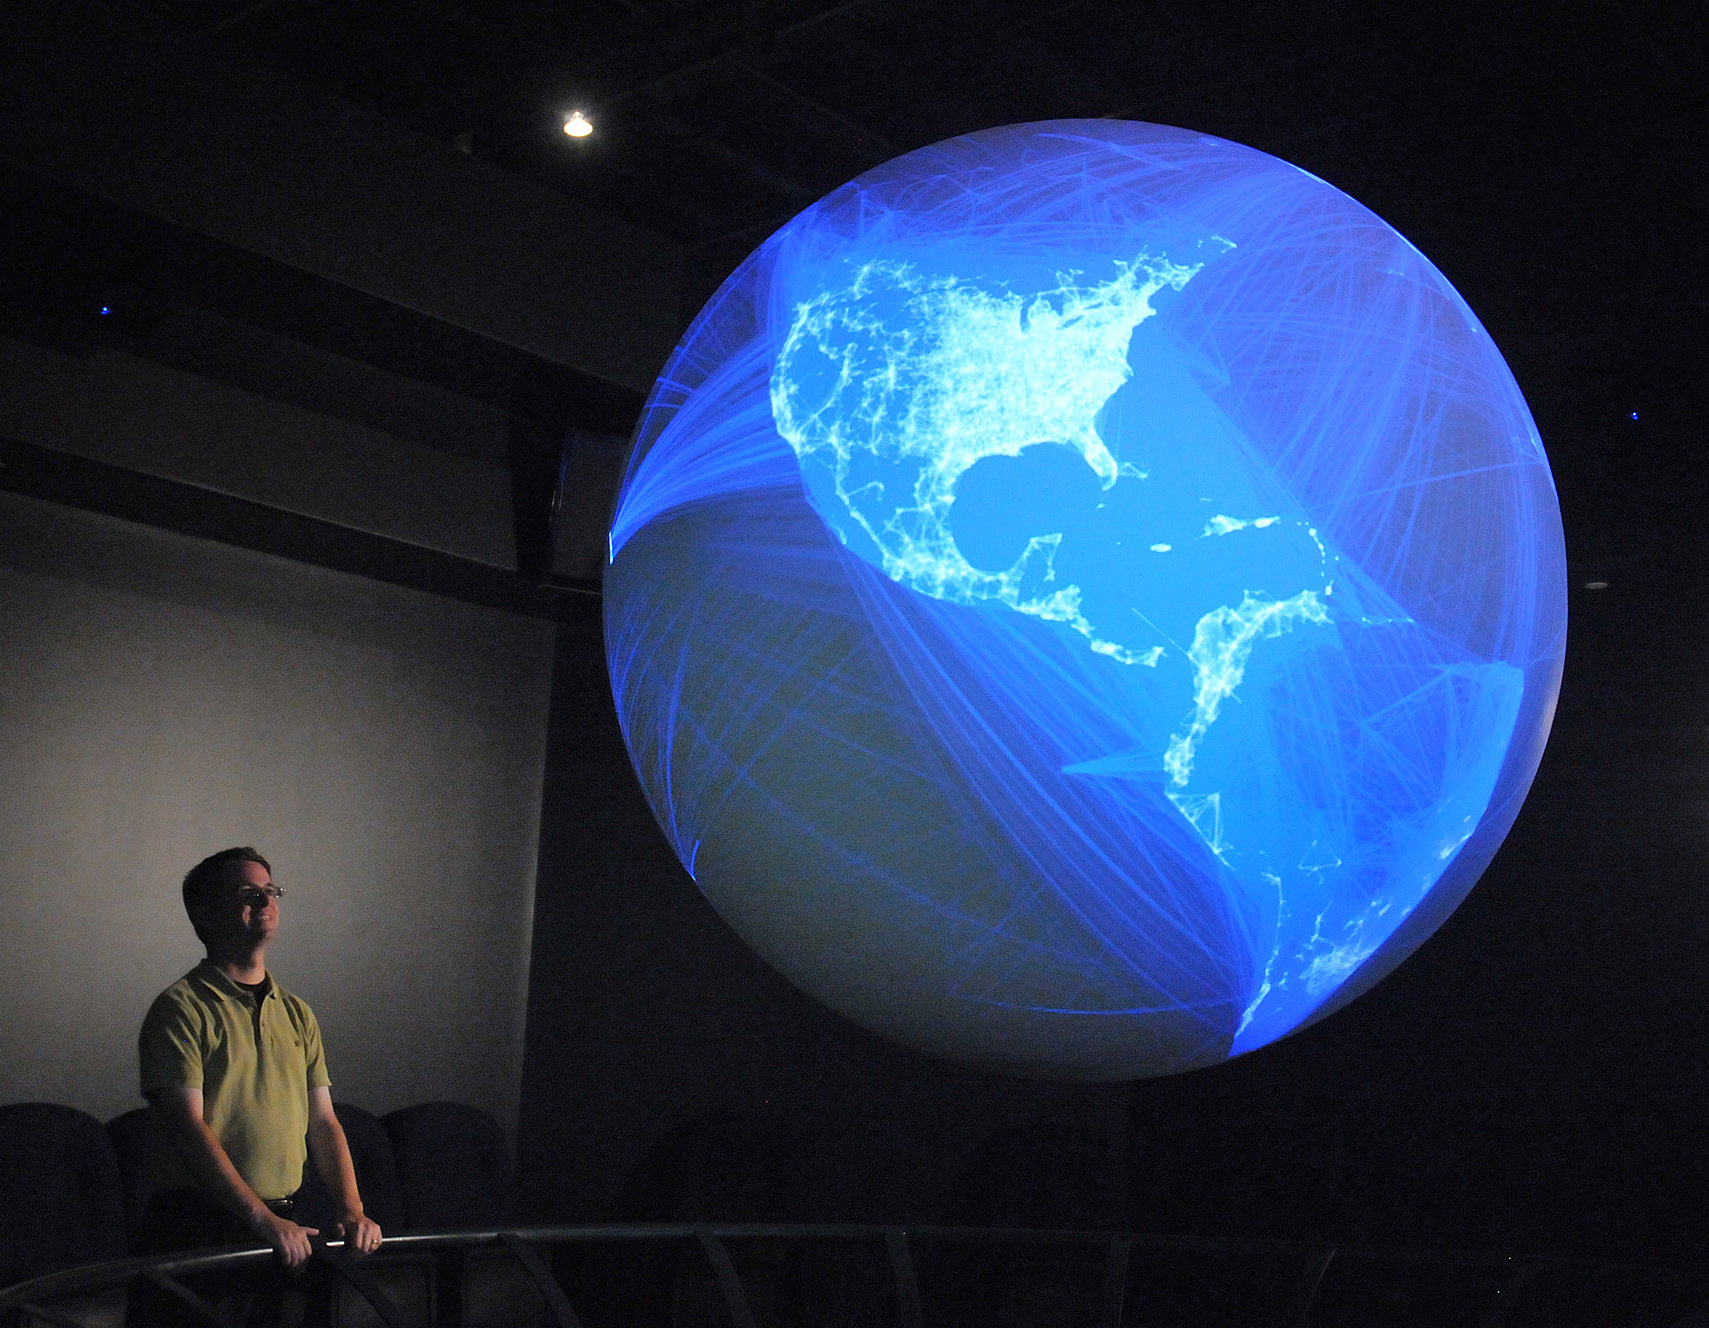 A person stands looking at Science On a Sphere displaying thousands of blue lines connecting different cities around the world